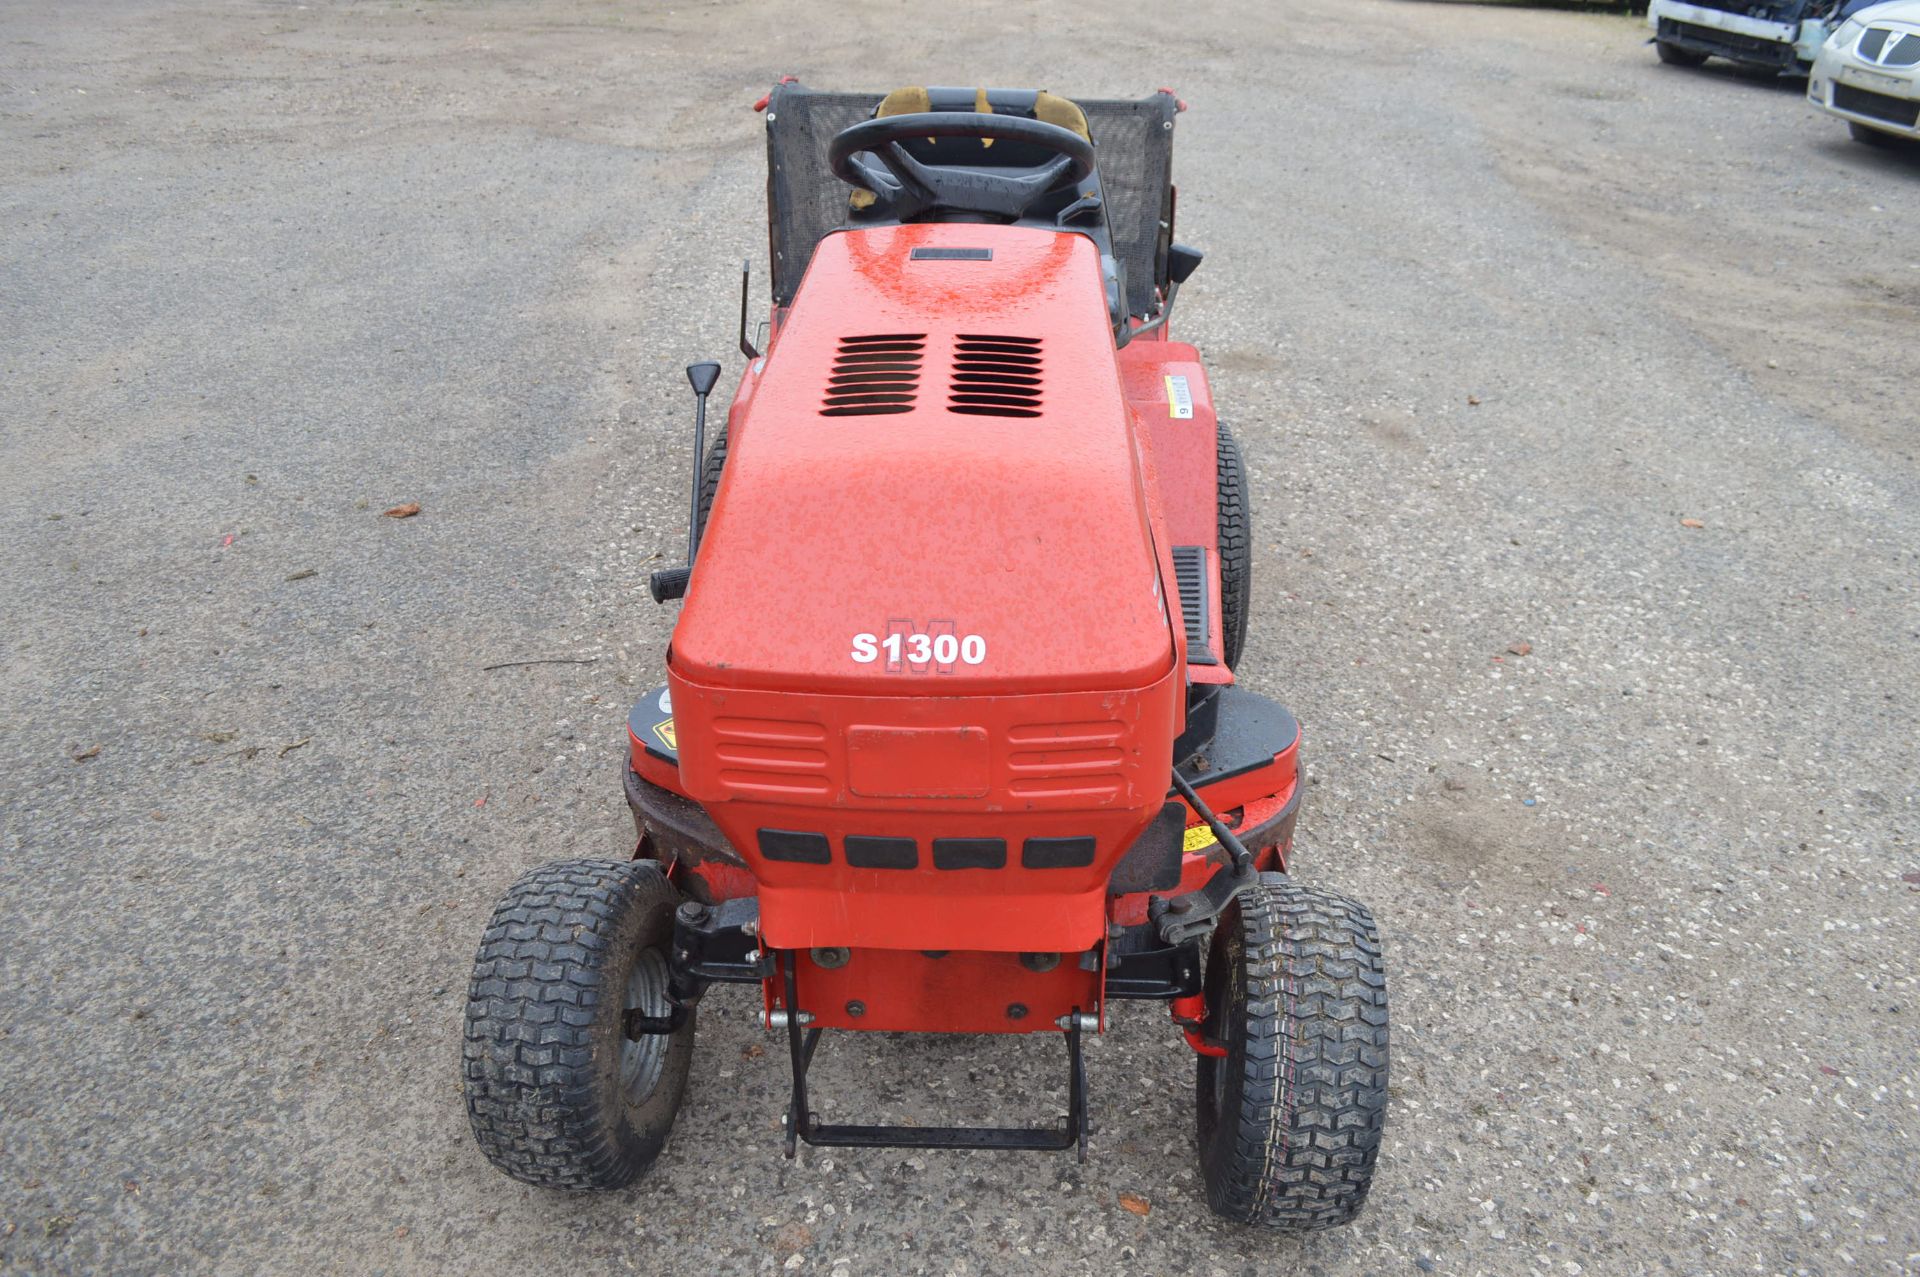 1999 WESTWOOD S1300 RIDE ON LAWN MOWER *NO VAT* - Image 2 of 10